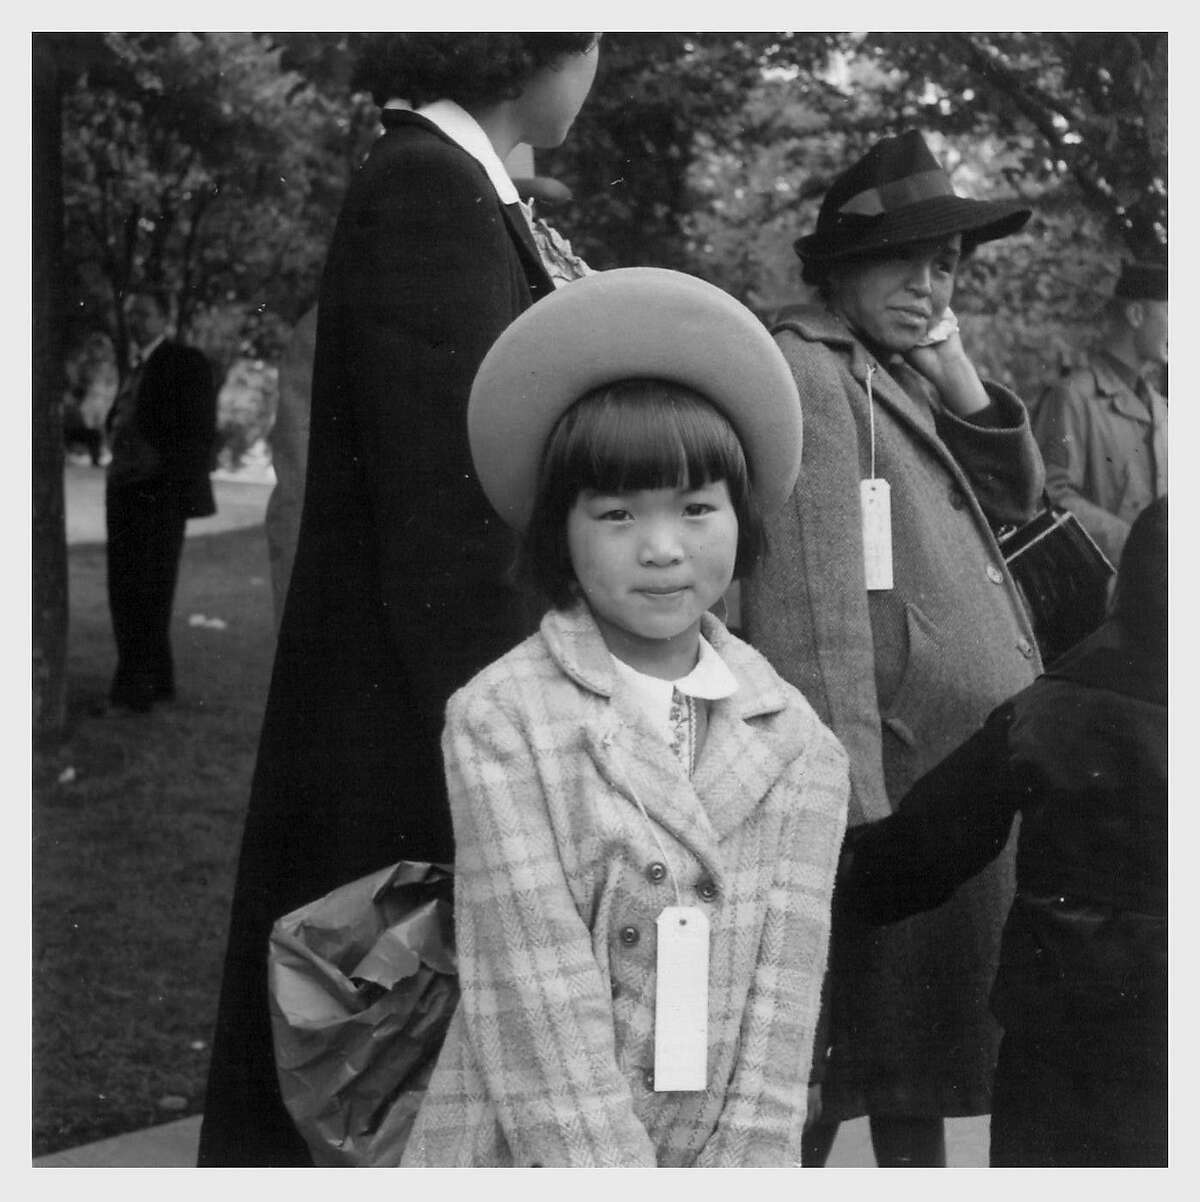 Dressed in her best clothes, Mae Yanagi, 7, waits with her pregnant mother, Kinuye Yanagi, right, to be bused to housing in the Tanforan Assembly Center by the War Relocation Authority. The Yanagi family spent several months in a horse stall at Tanforan before being sent to the Topaz Internment Camp in the Utah desert. Hayward, California. Photograph by Dorothea Lange.5/ 8/ 42